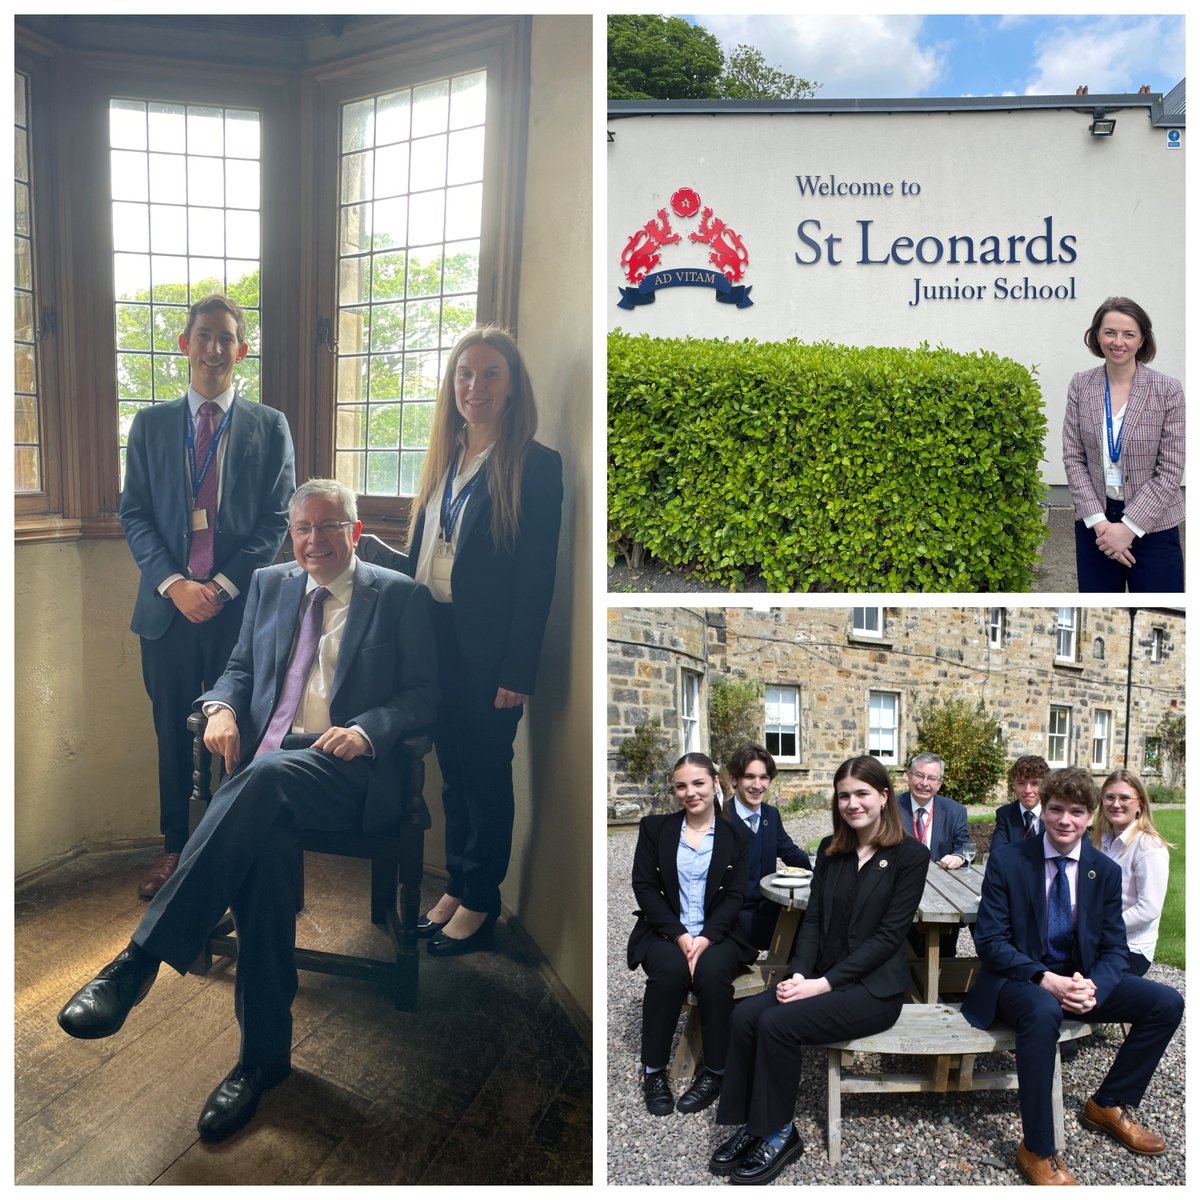 Claire Robertson, Junior Head, gave Dr Hyde a tour before joining colleagues and some exceptional students for lunch in the sunshine. Thanks to Simon Brian @StLeonards_Head for the invitation and the generous hospitality.